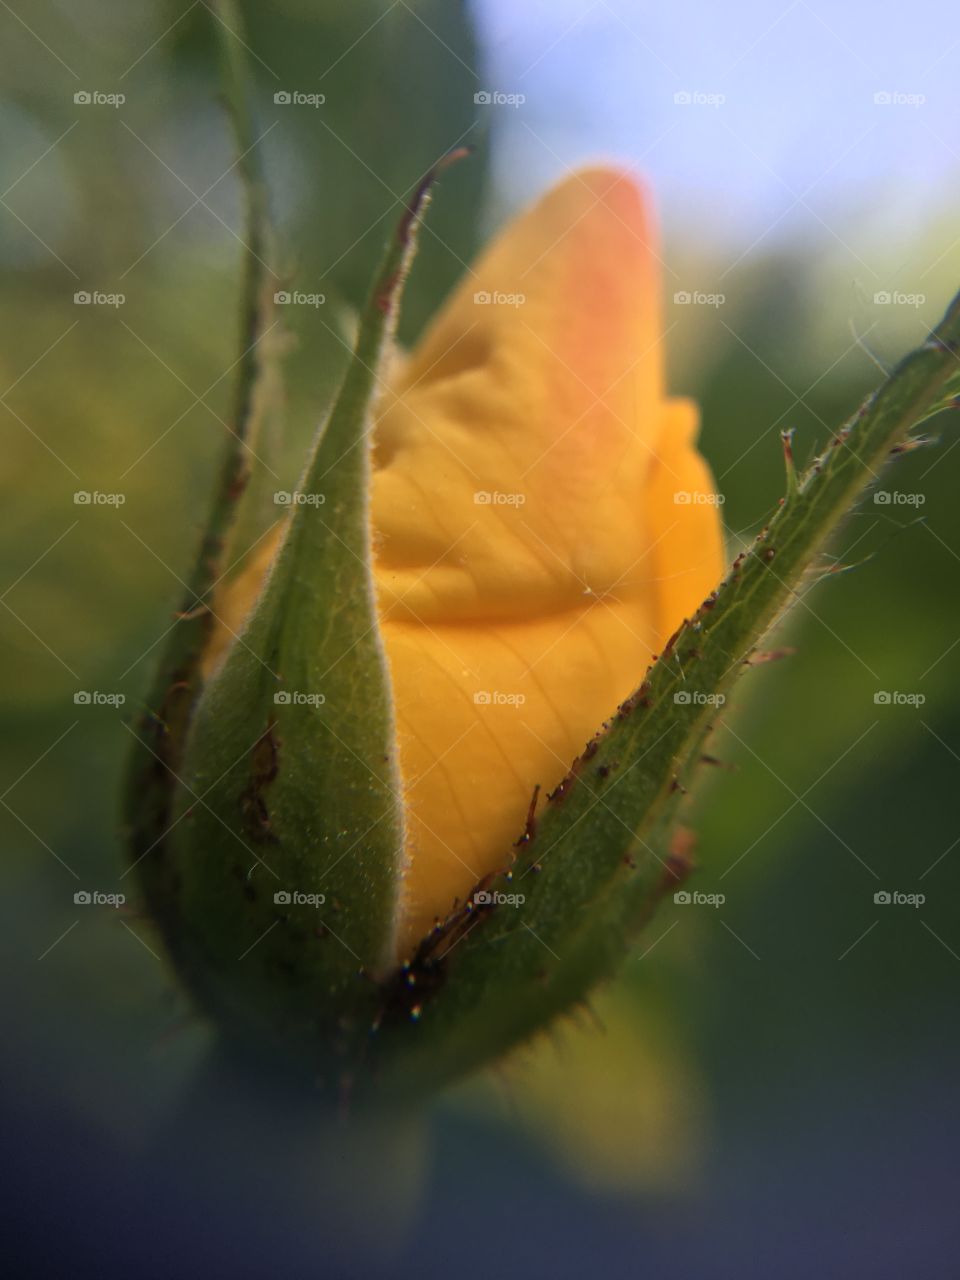 Nature, No Person, Flower, Insect, Leaf